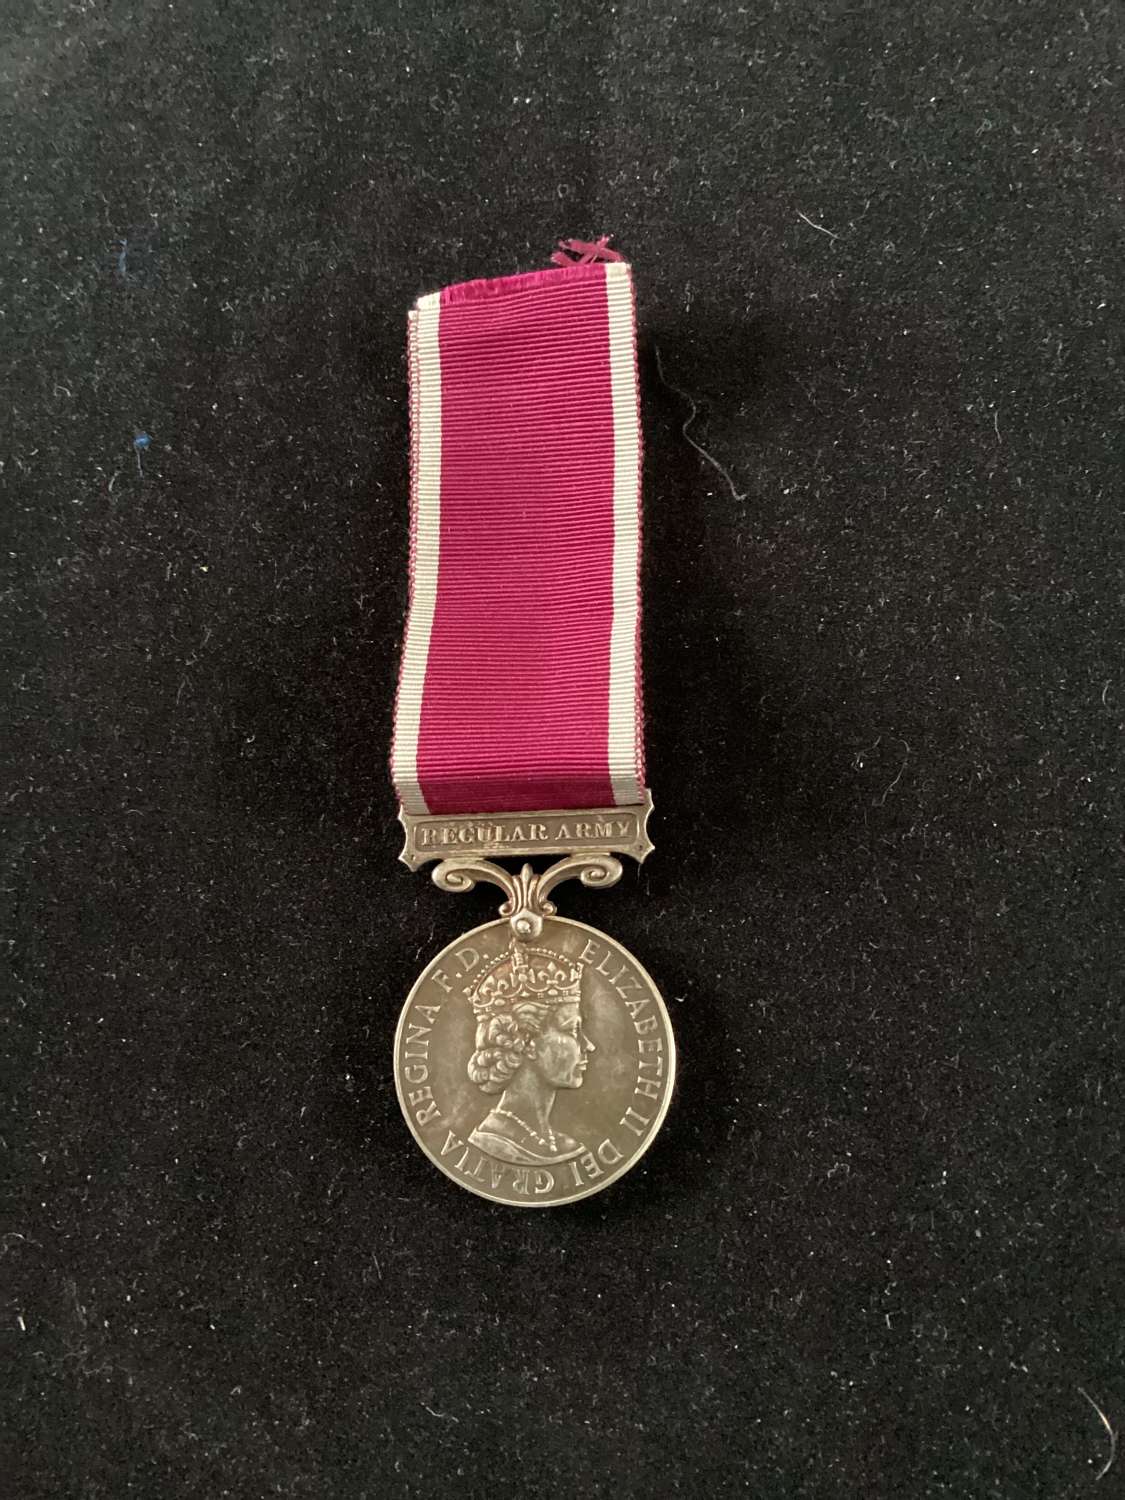 Regular Army LSGC Medal QE2 Army Physical Training Corp